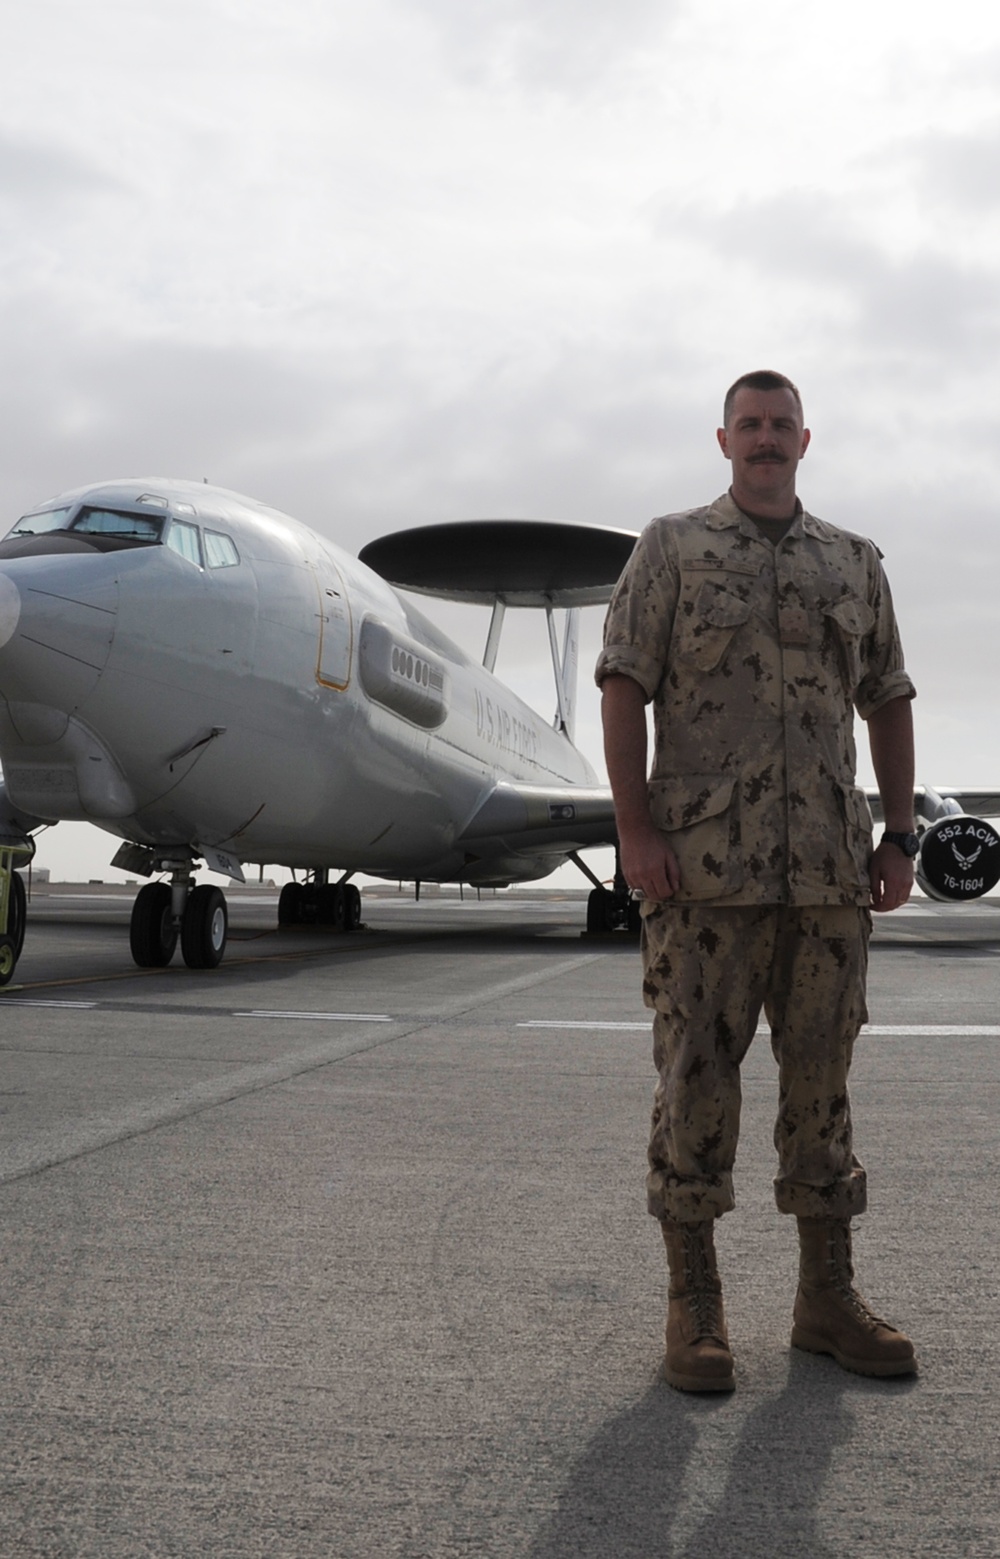 Canadian Forces Officer, Sudbury Native, Serves As AWACS Mission Crew Commander With Southwest Asia Unit